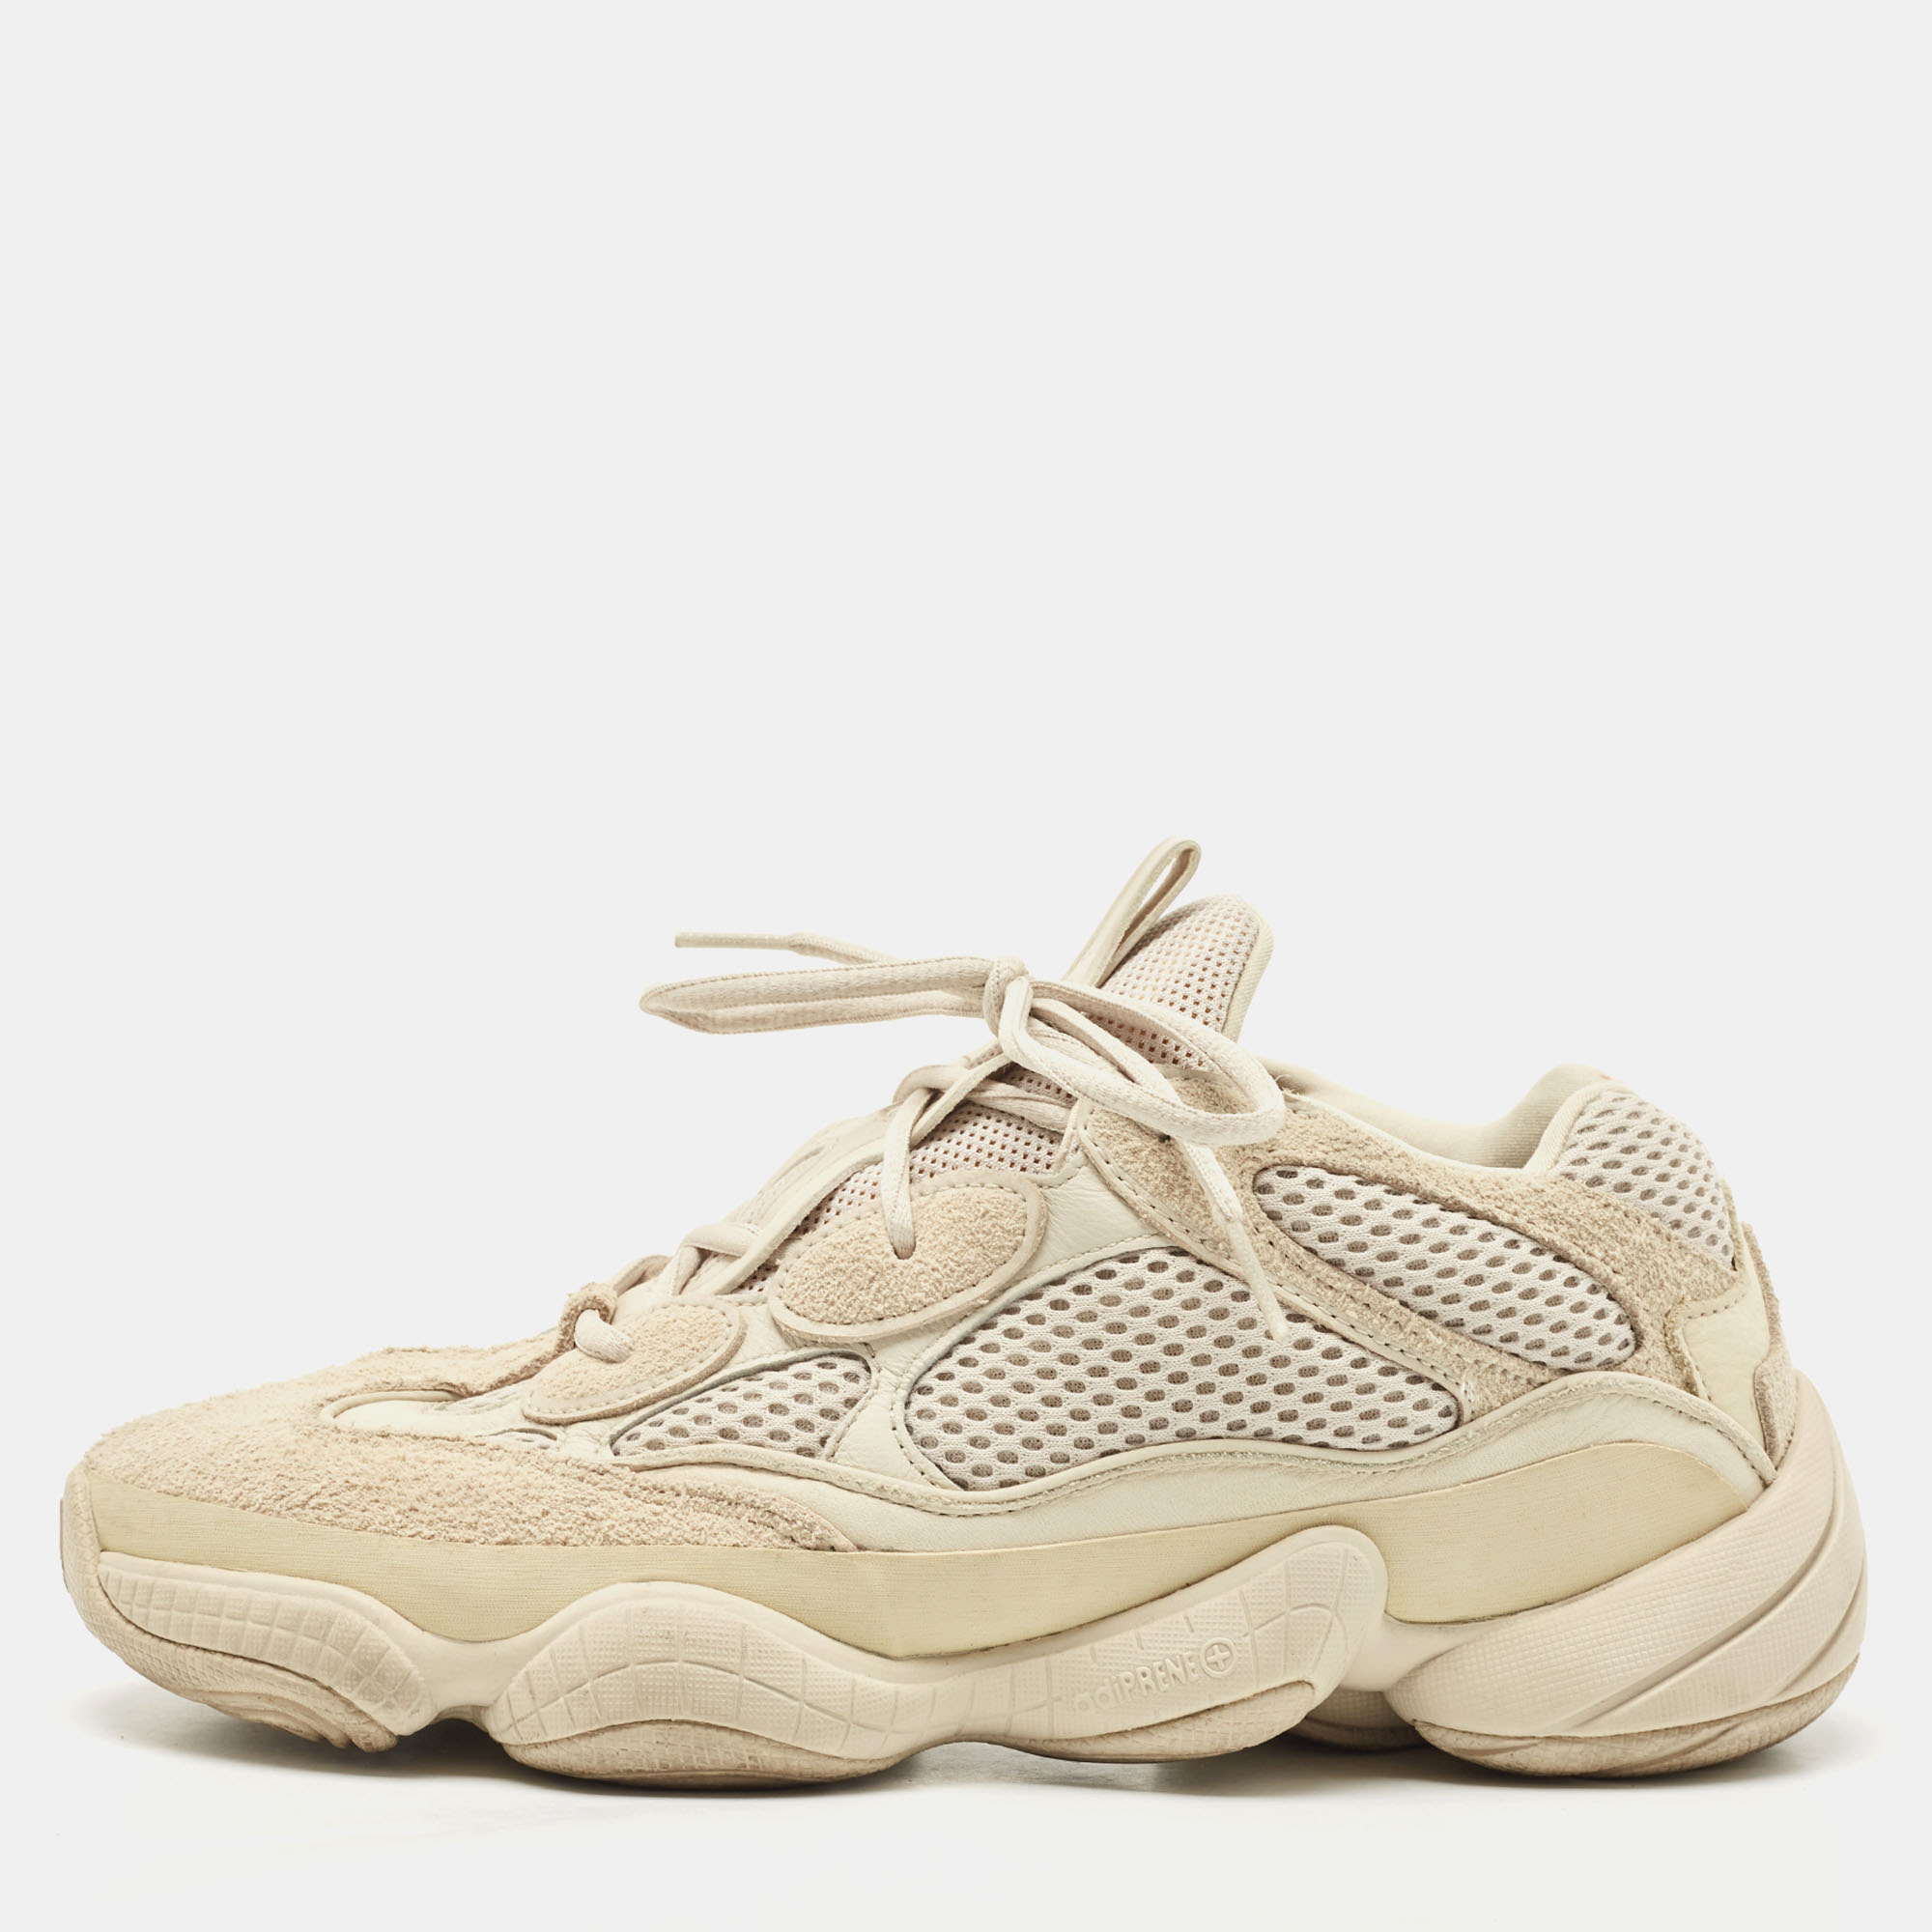 

Yeezy x Adidas Cream Suede and Mesh Yeezy 500 Blush Sneakers Size